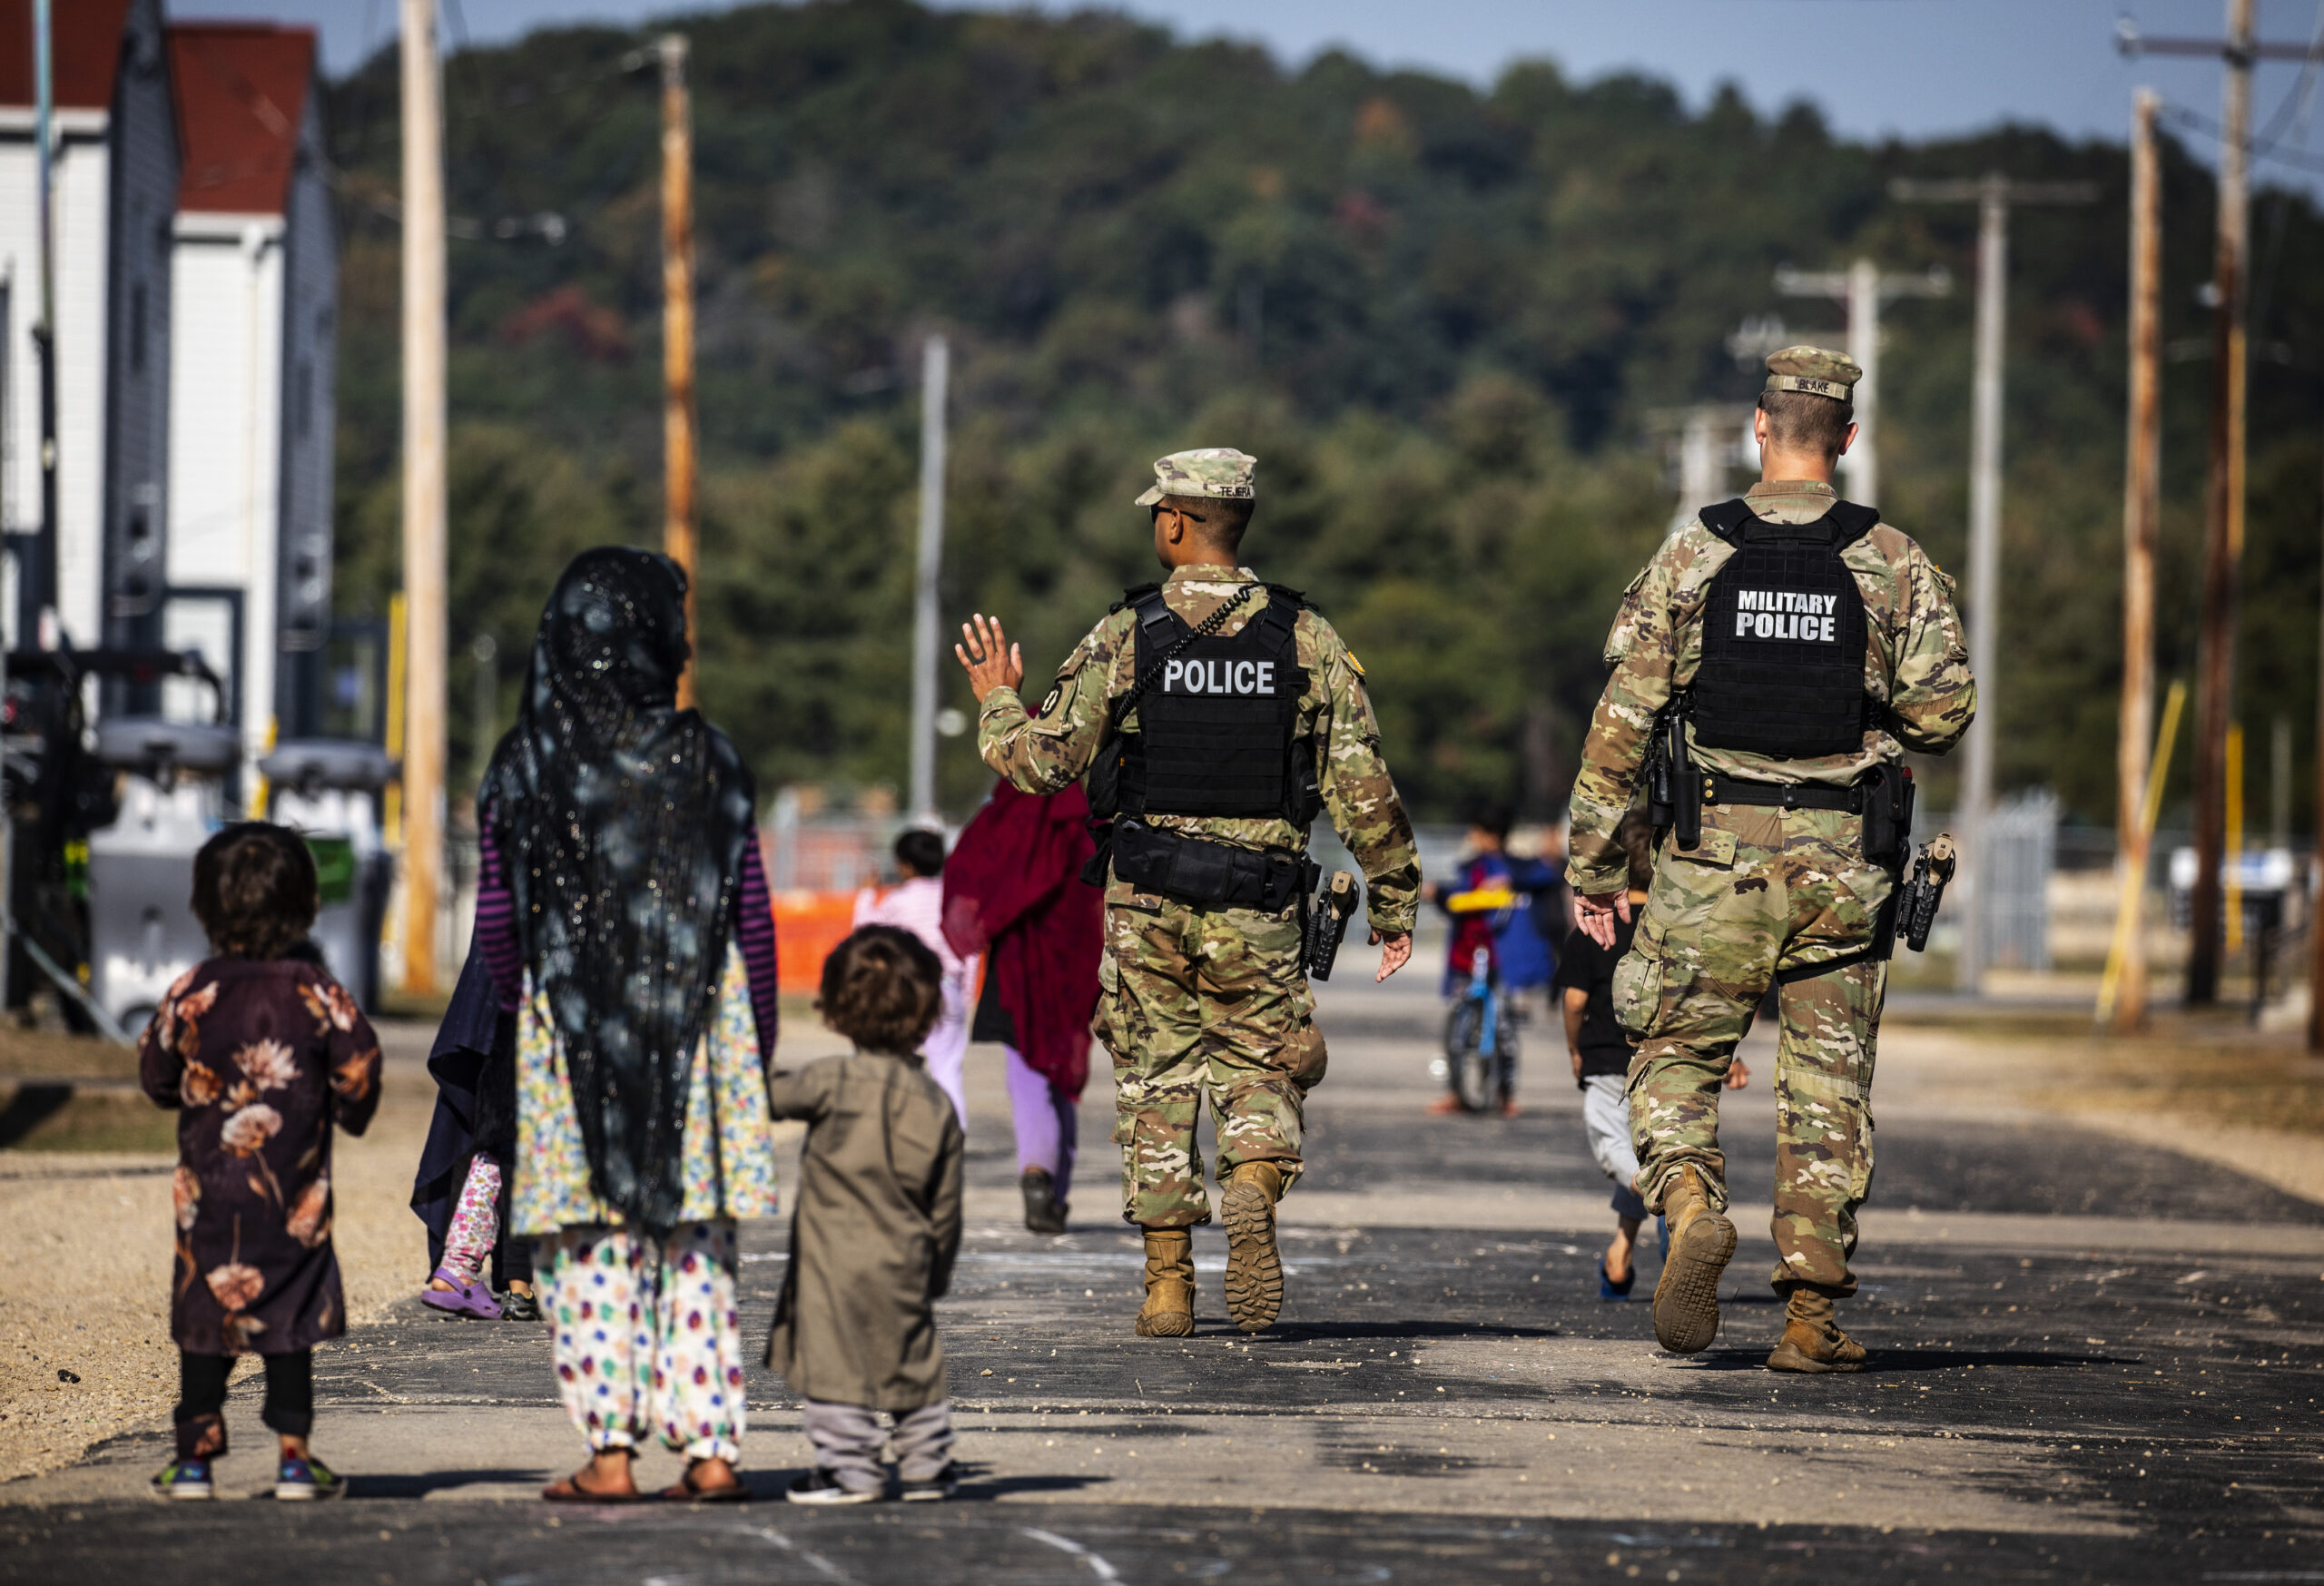 Military policy waving at Afghan refugees at Fort McCoy